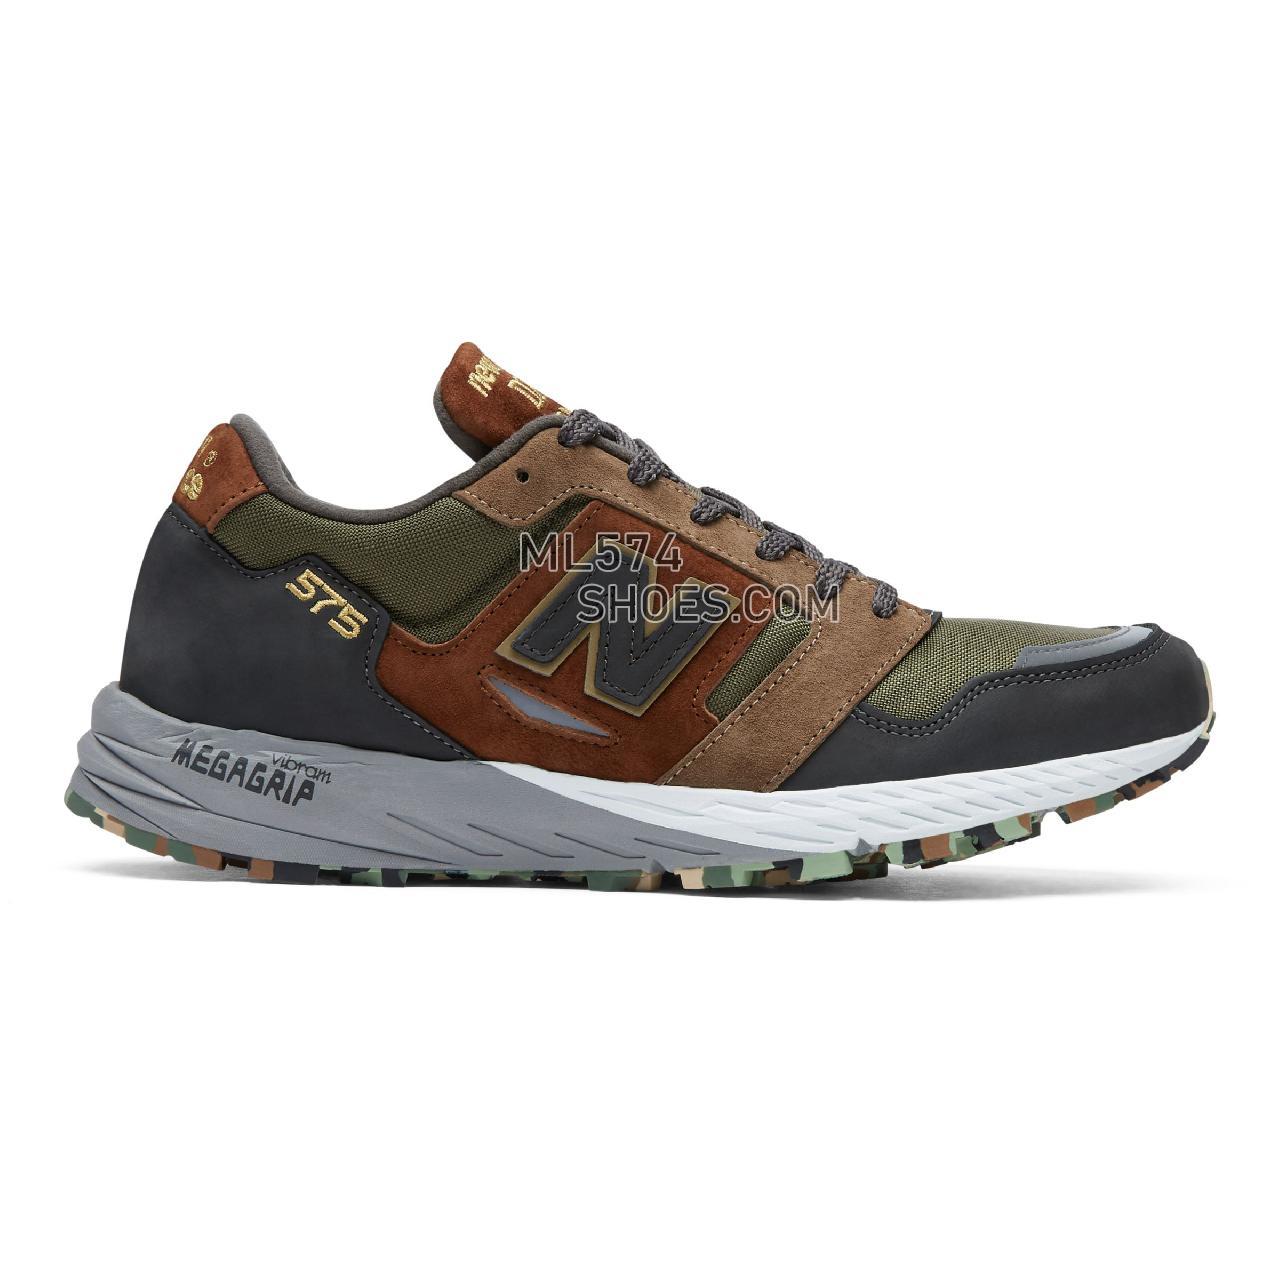 New Balance Made in UK 575 - Men's Made in UK 575 Classic MTL575V1-27394-M - Dark Green with Brown and Black - MTL575SO